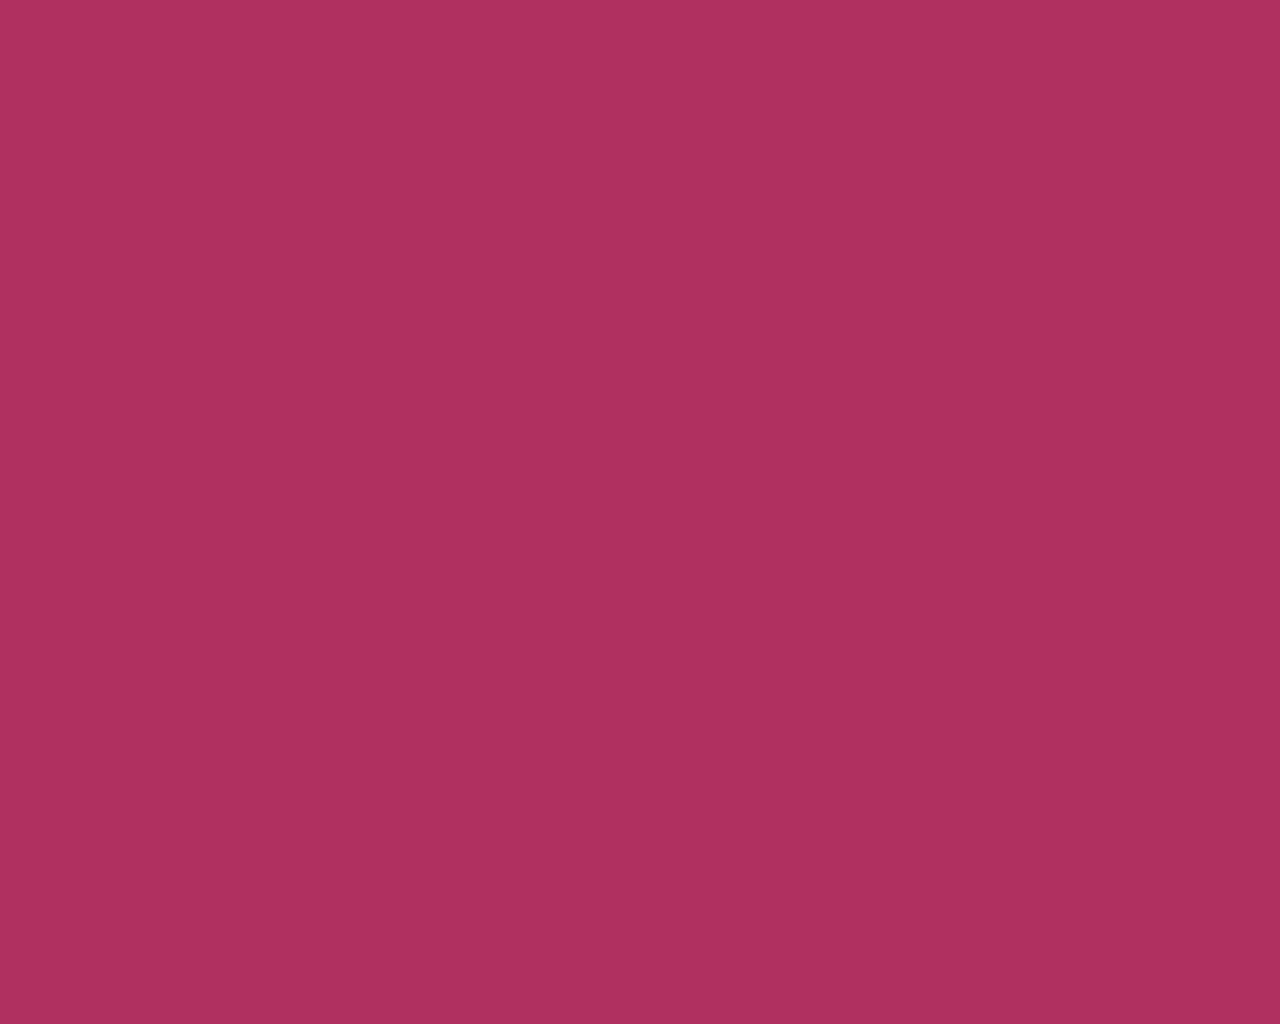 Free 1280x1024 Resolution Maroon X11 Gui Solid Color Background View